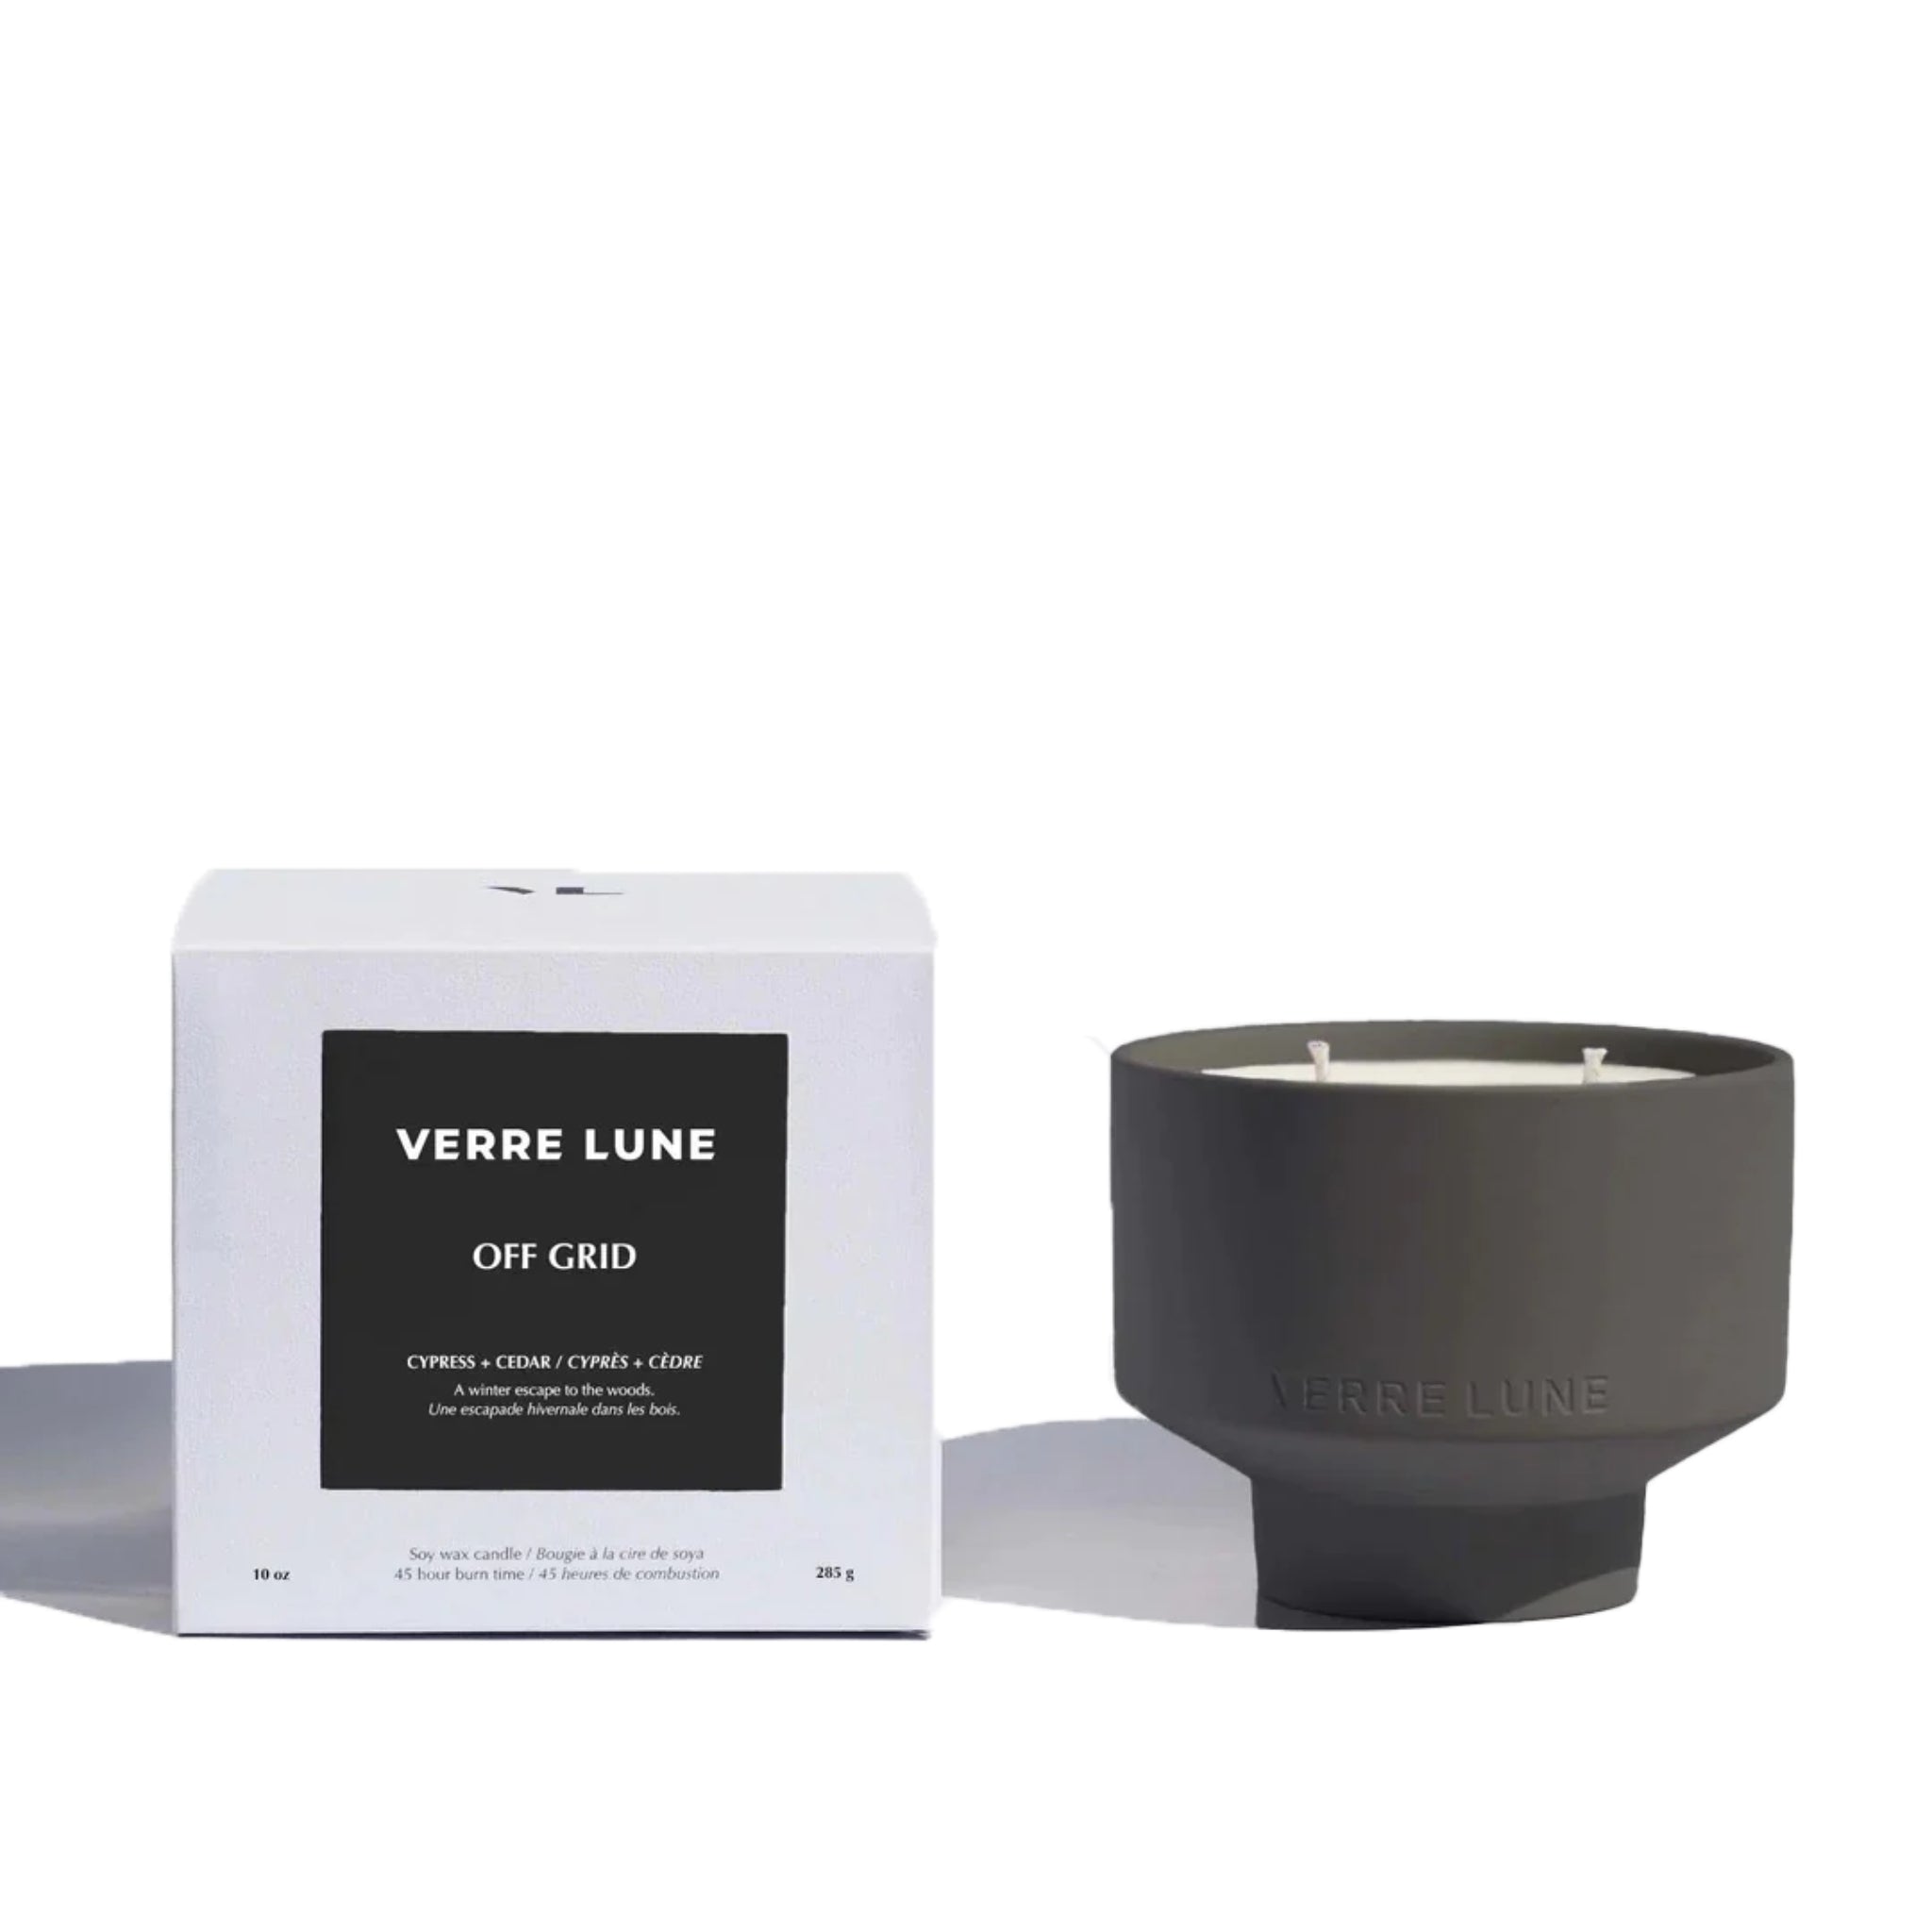 Verre Lune off grid scented candle (right) with its pakaging (left) on a white background